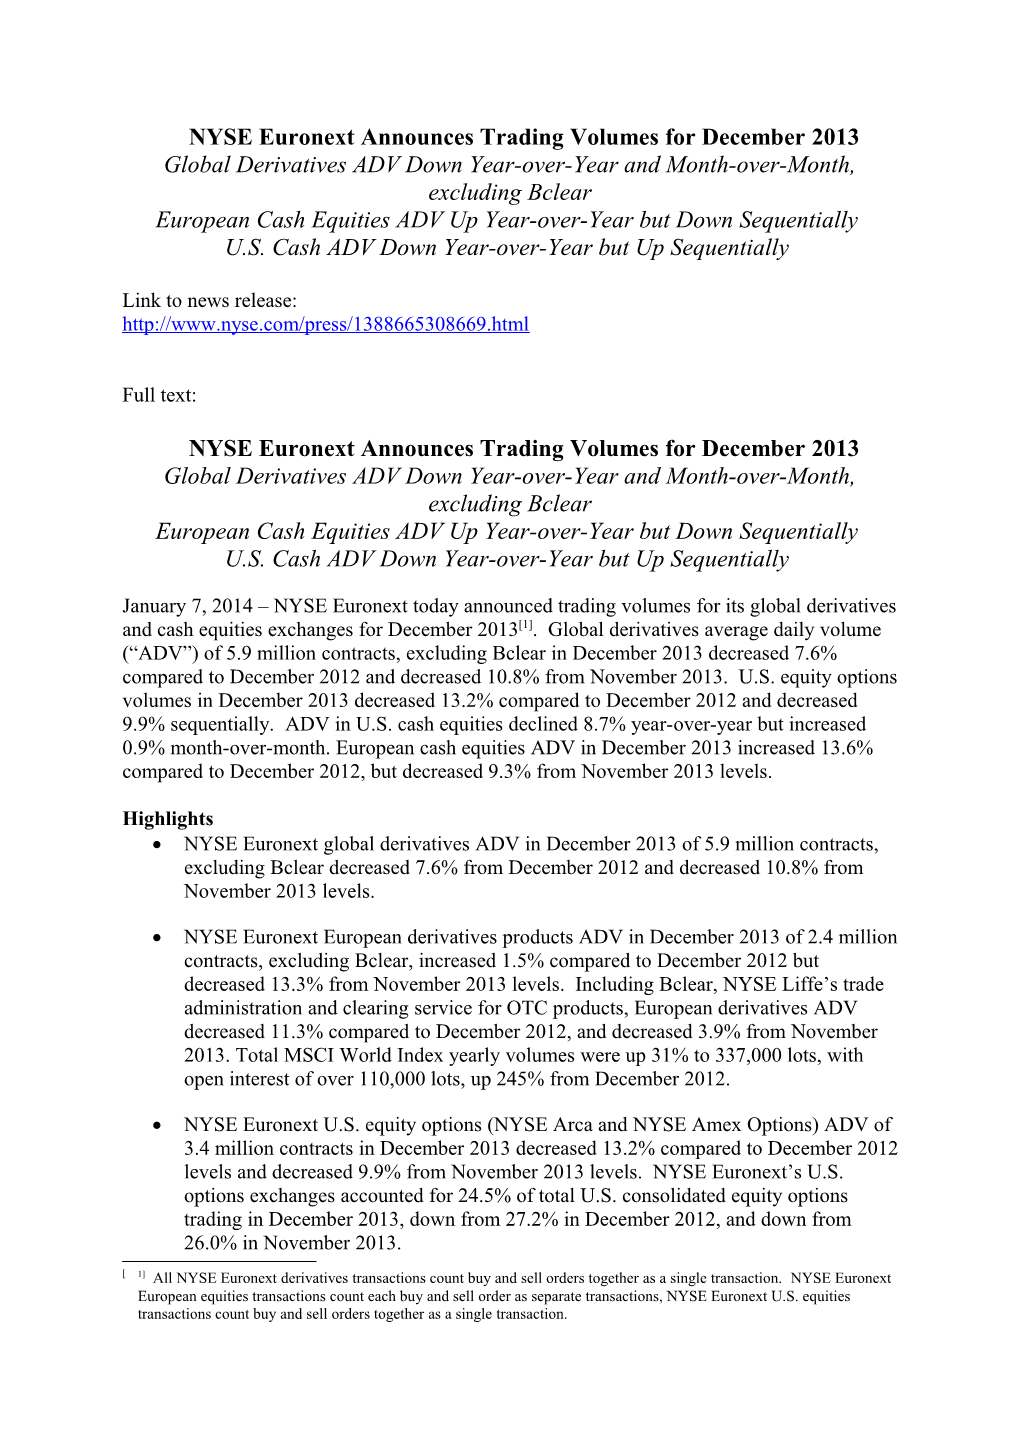 NYSE Euronext Announces Trading Volumes for December 2013